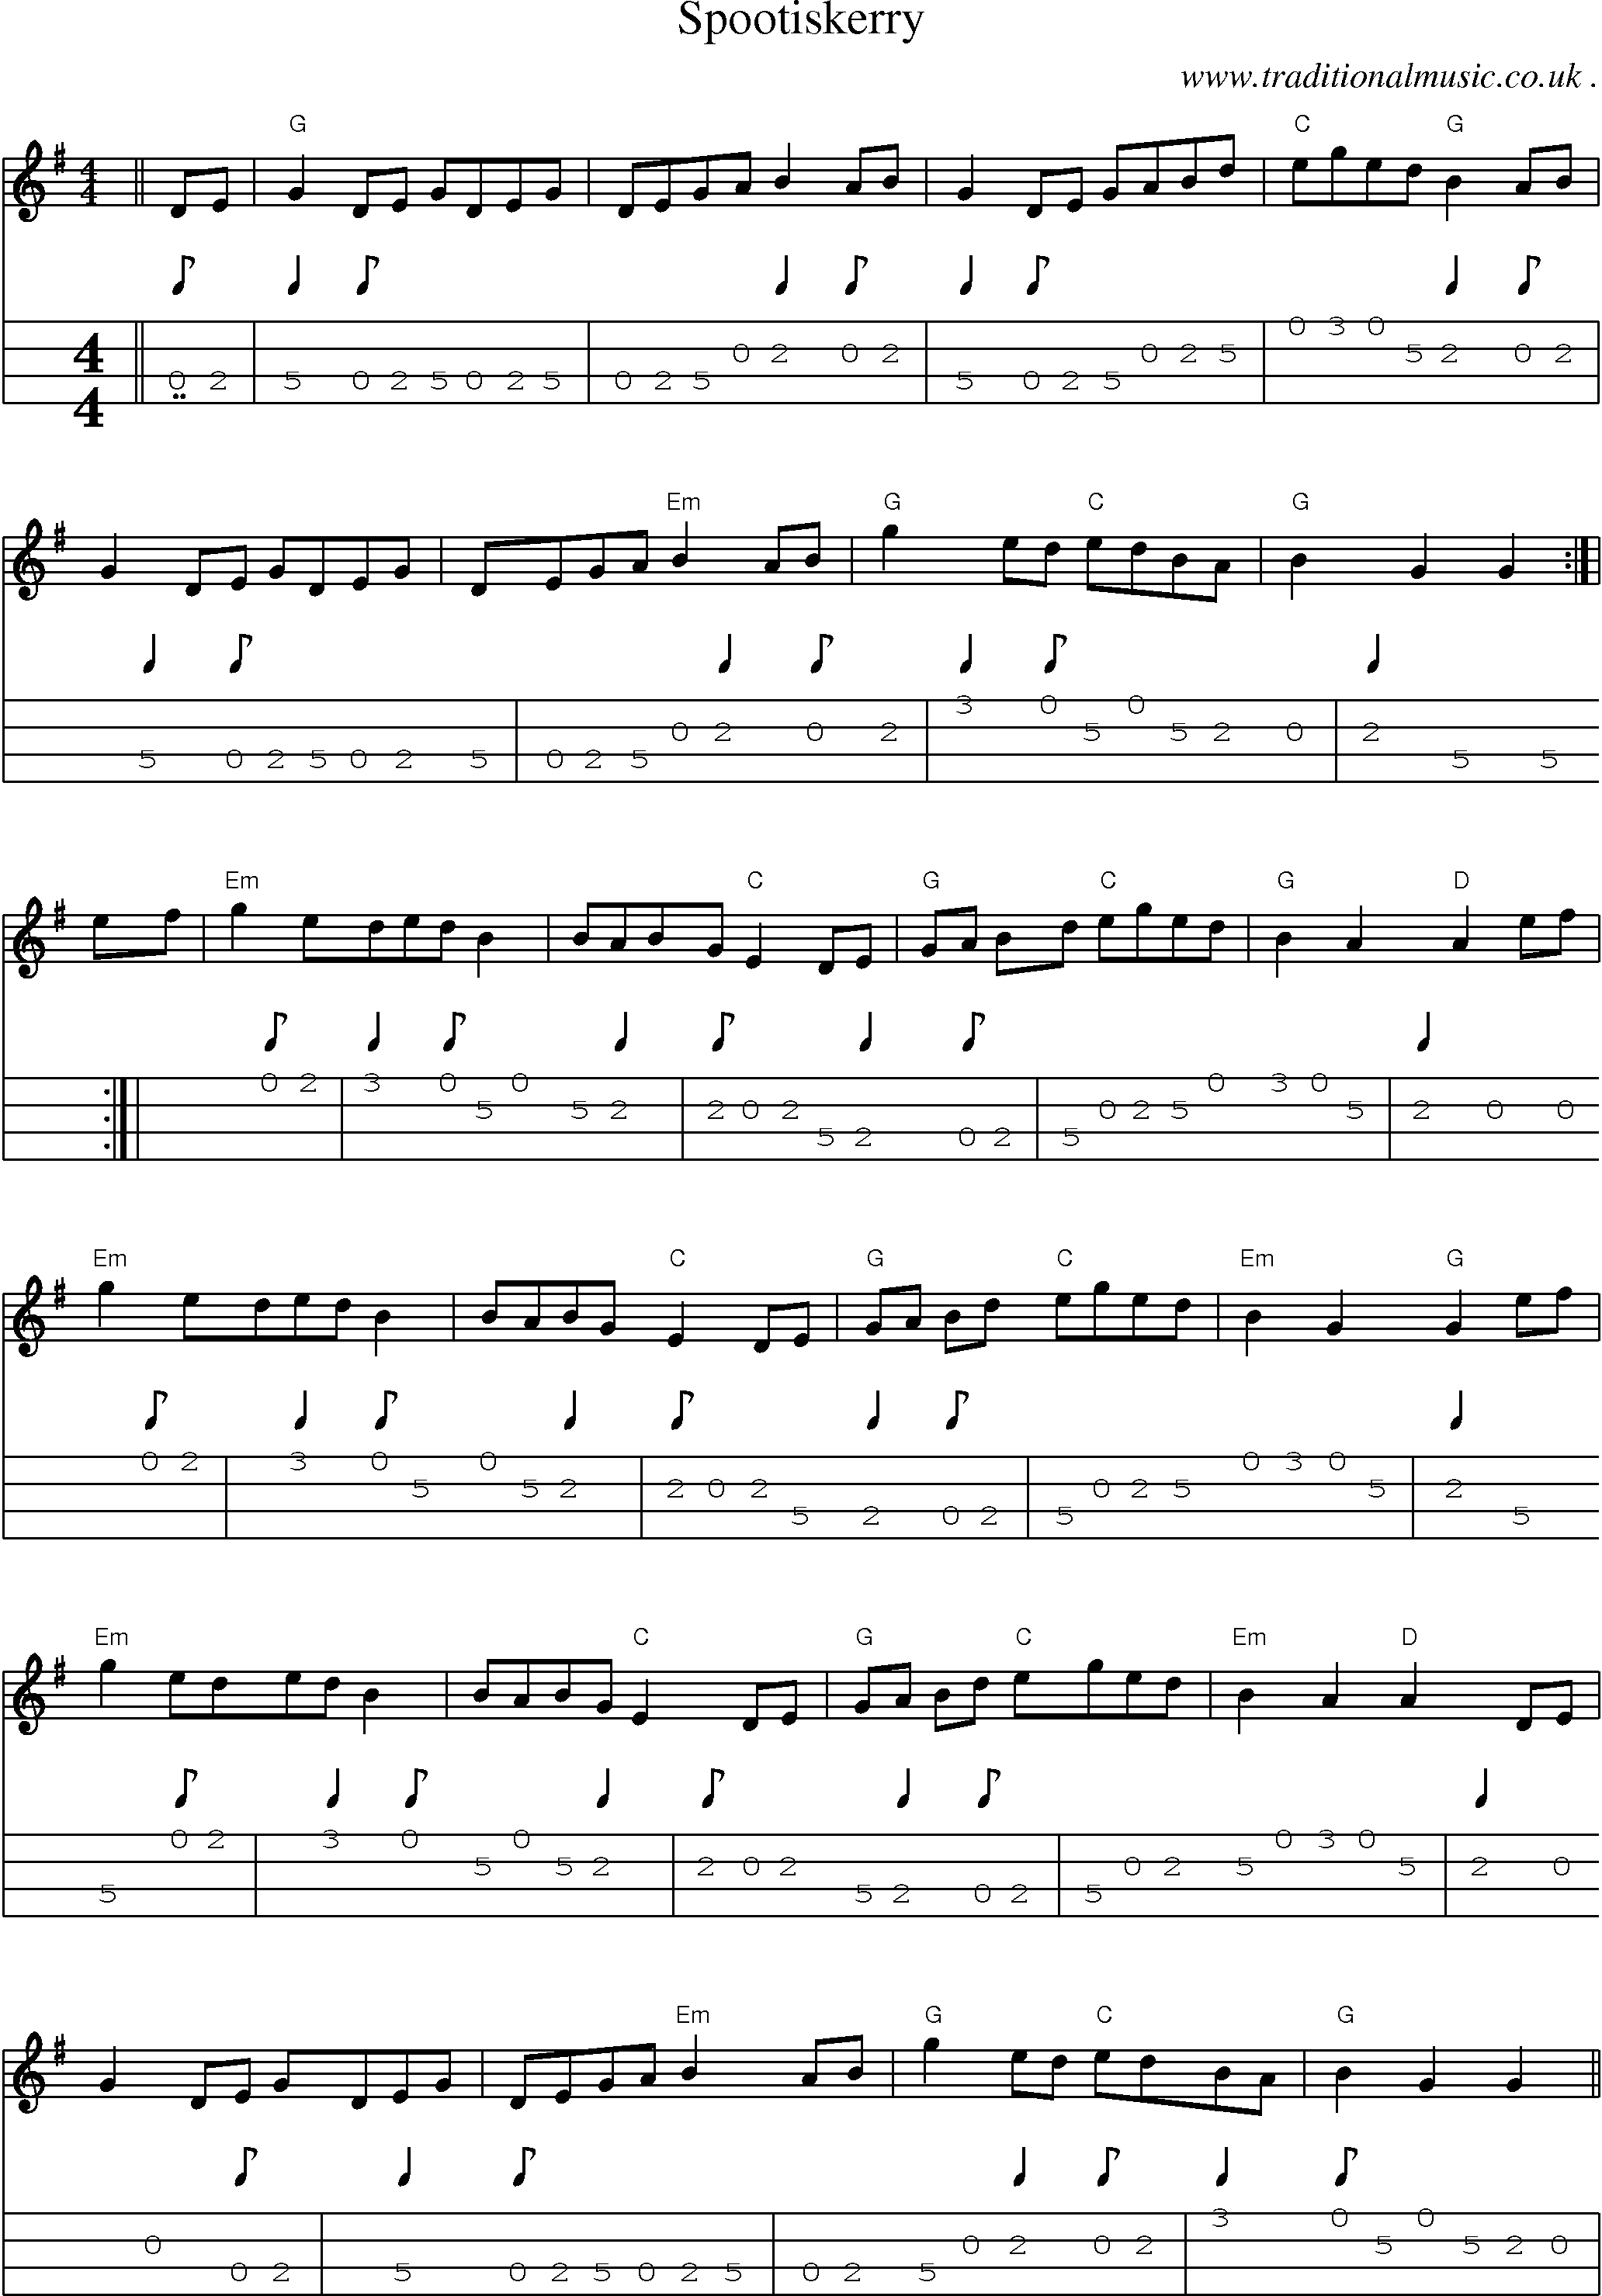 Sheet-music  score, Chords and Mandolin Tabs for Spootiskerry